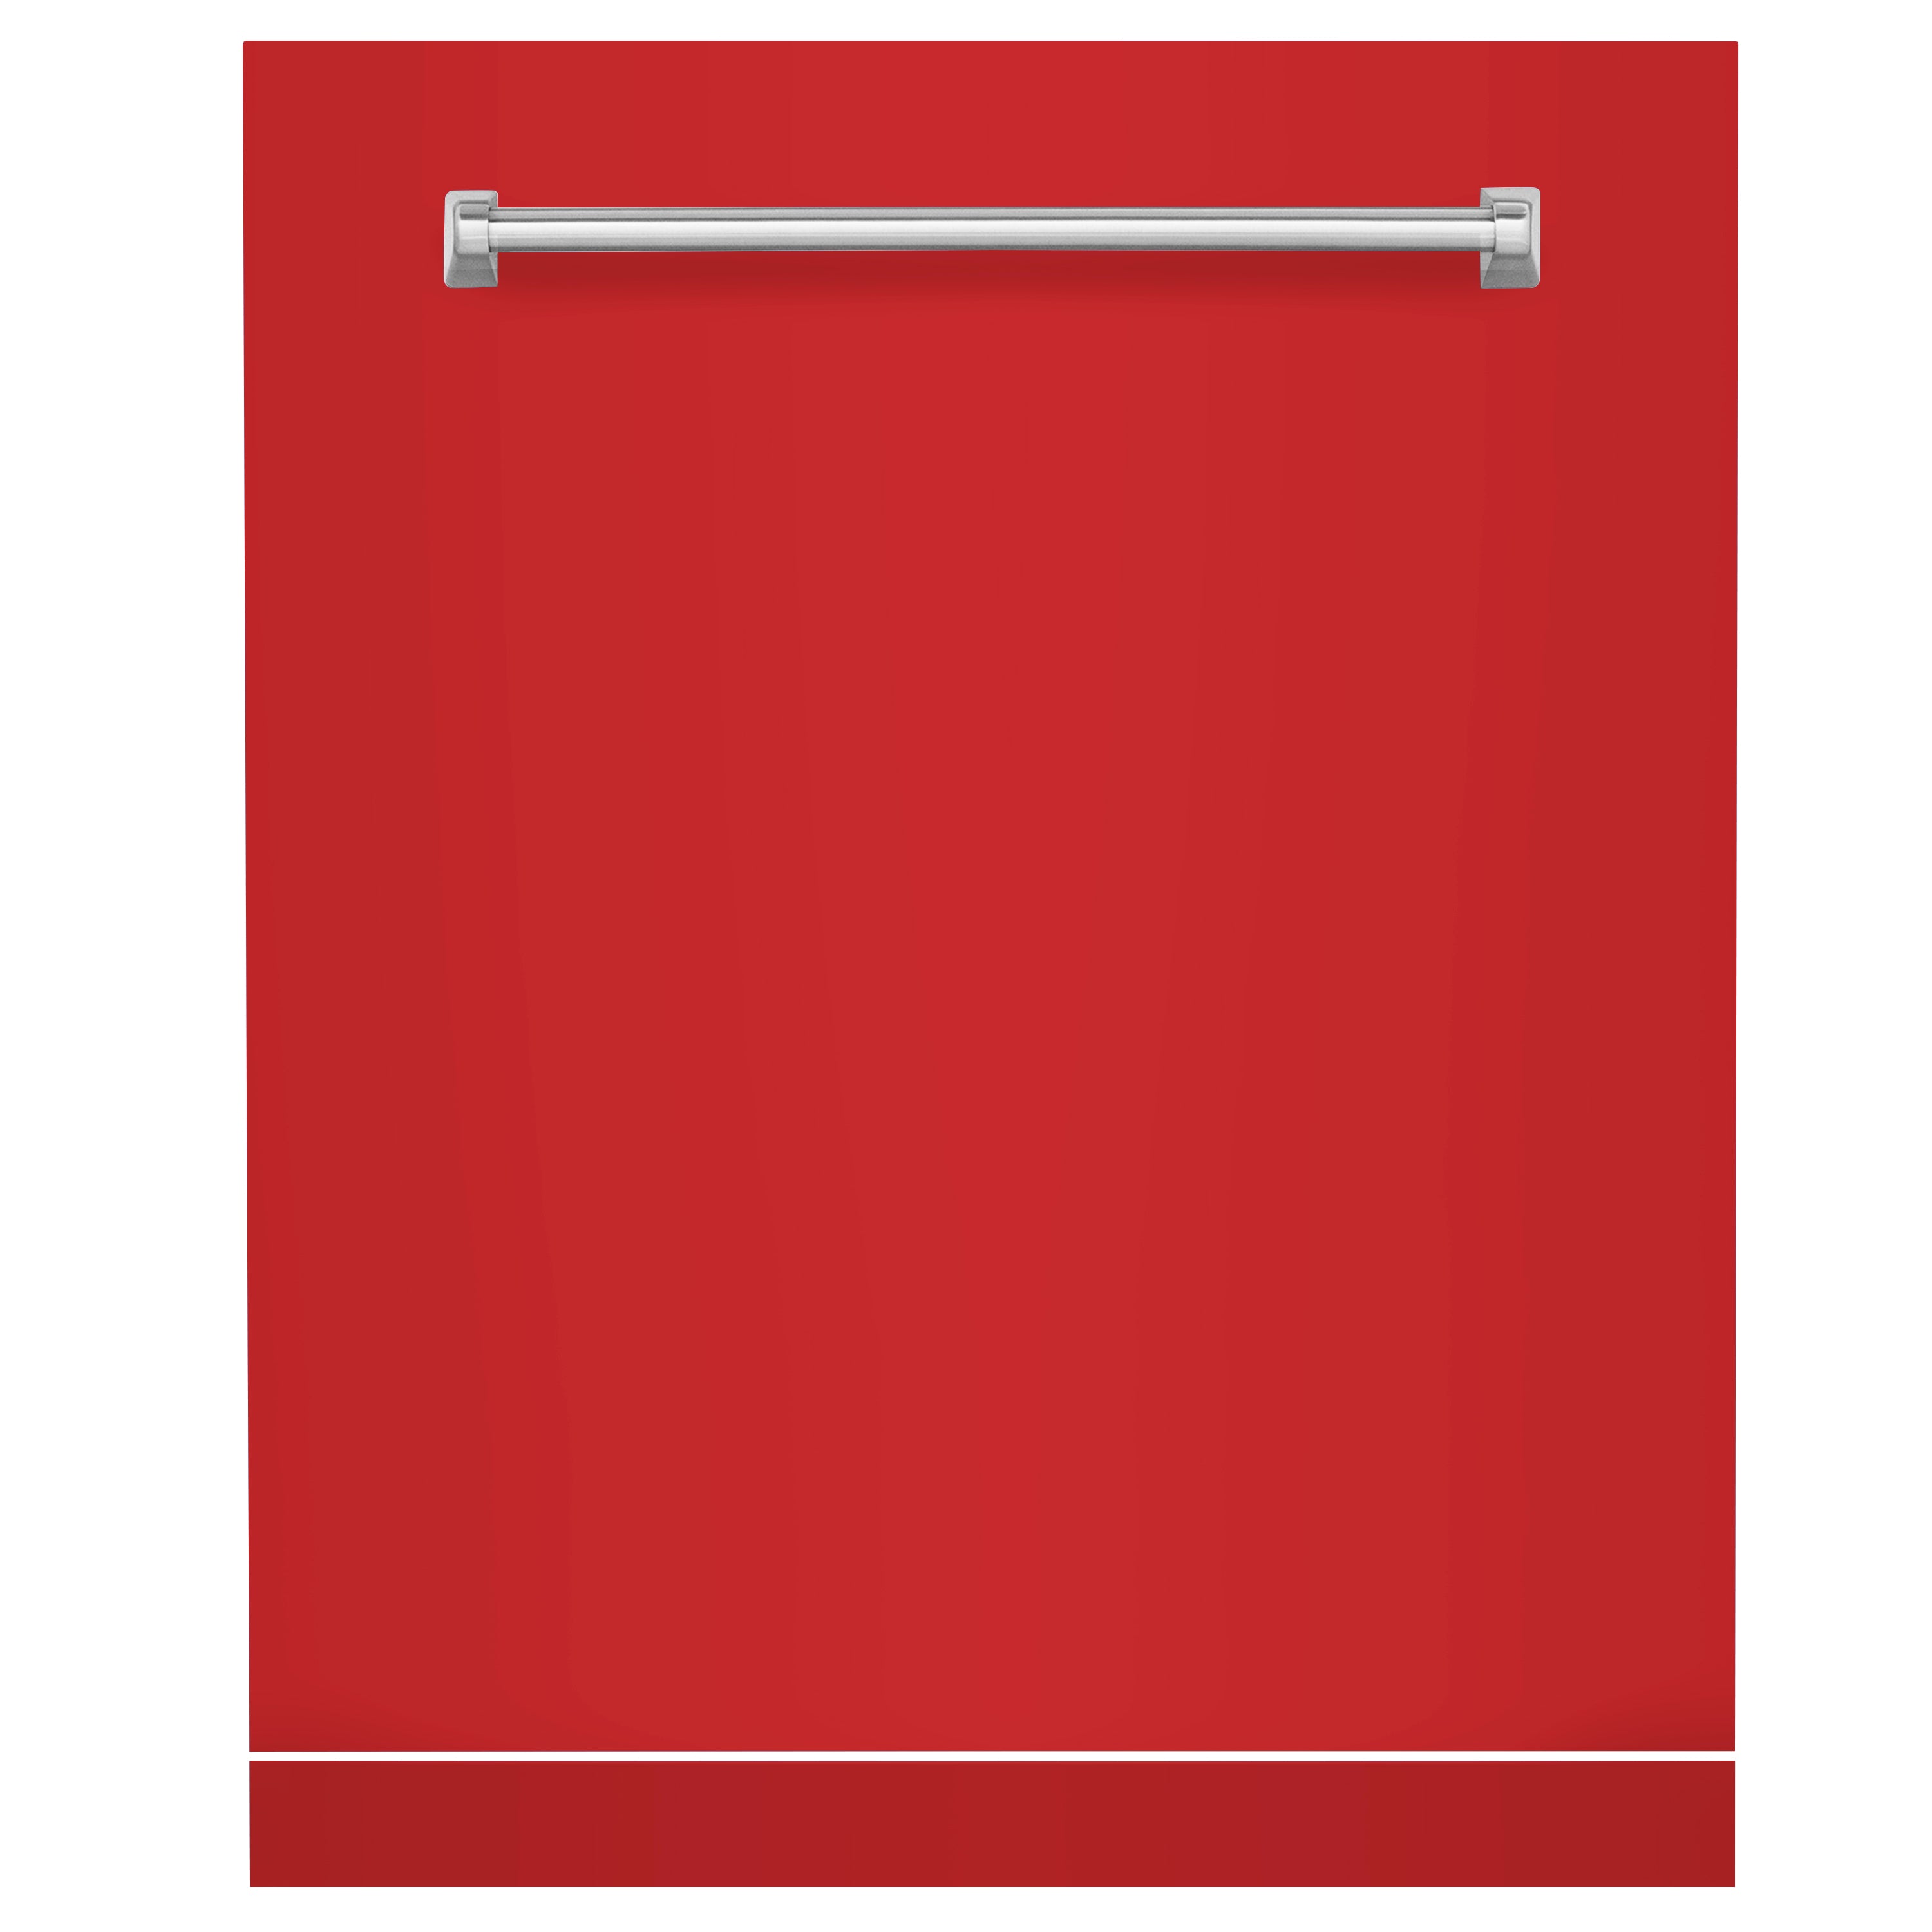 ZLINE 24" Monument Dishwasher Panel with Traditional Handle in Red Matte with Kickplate